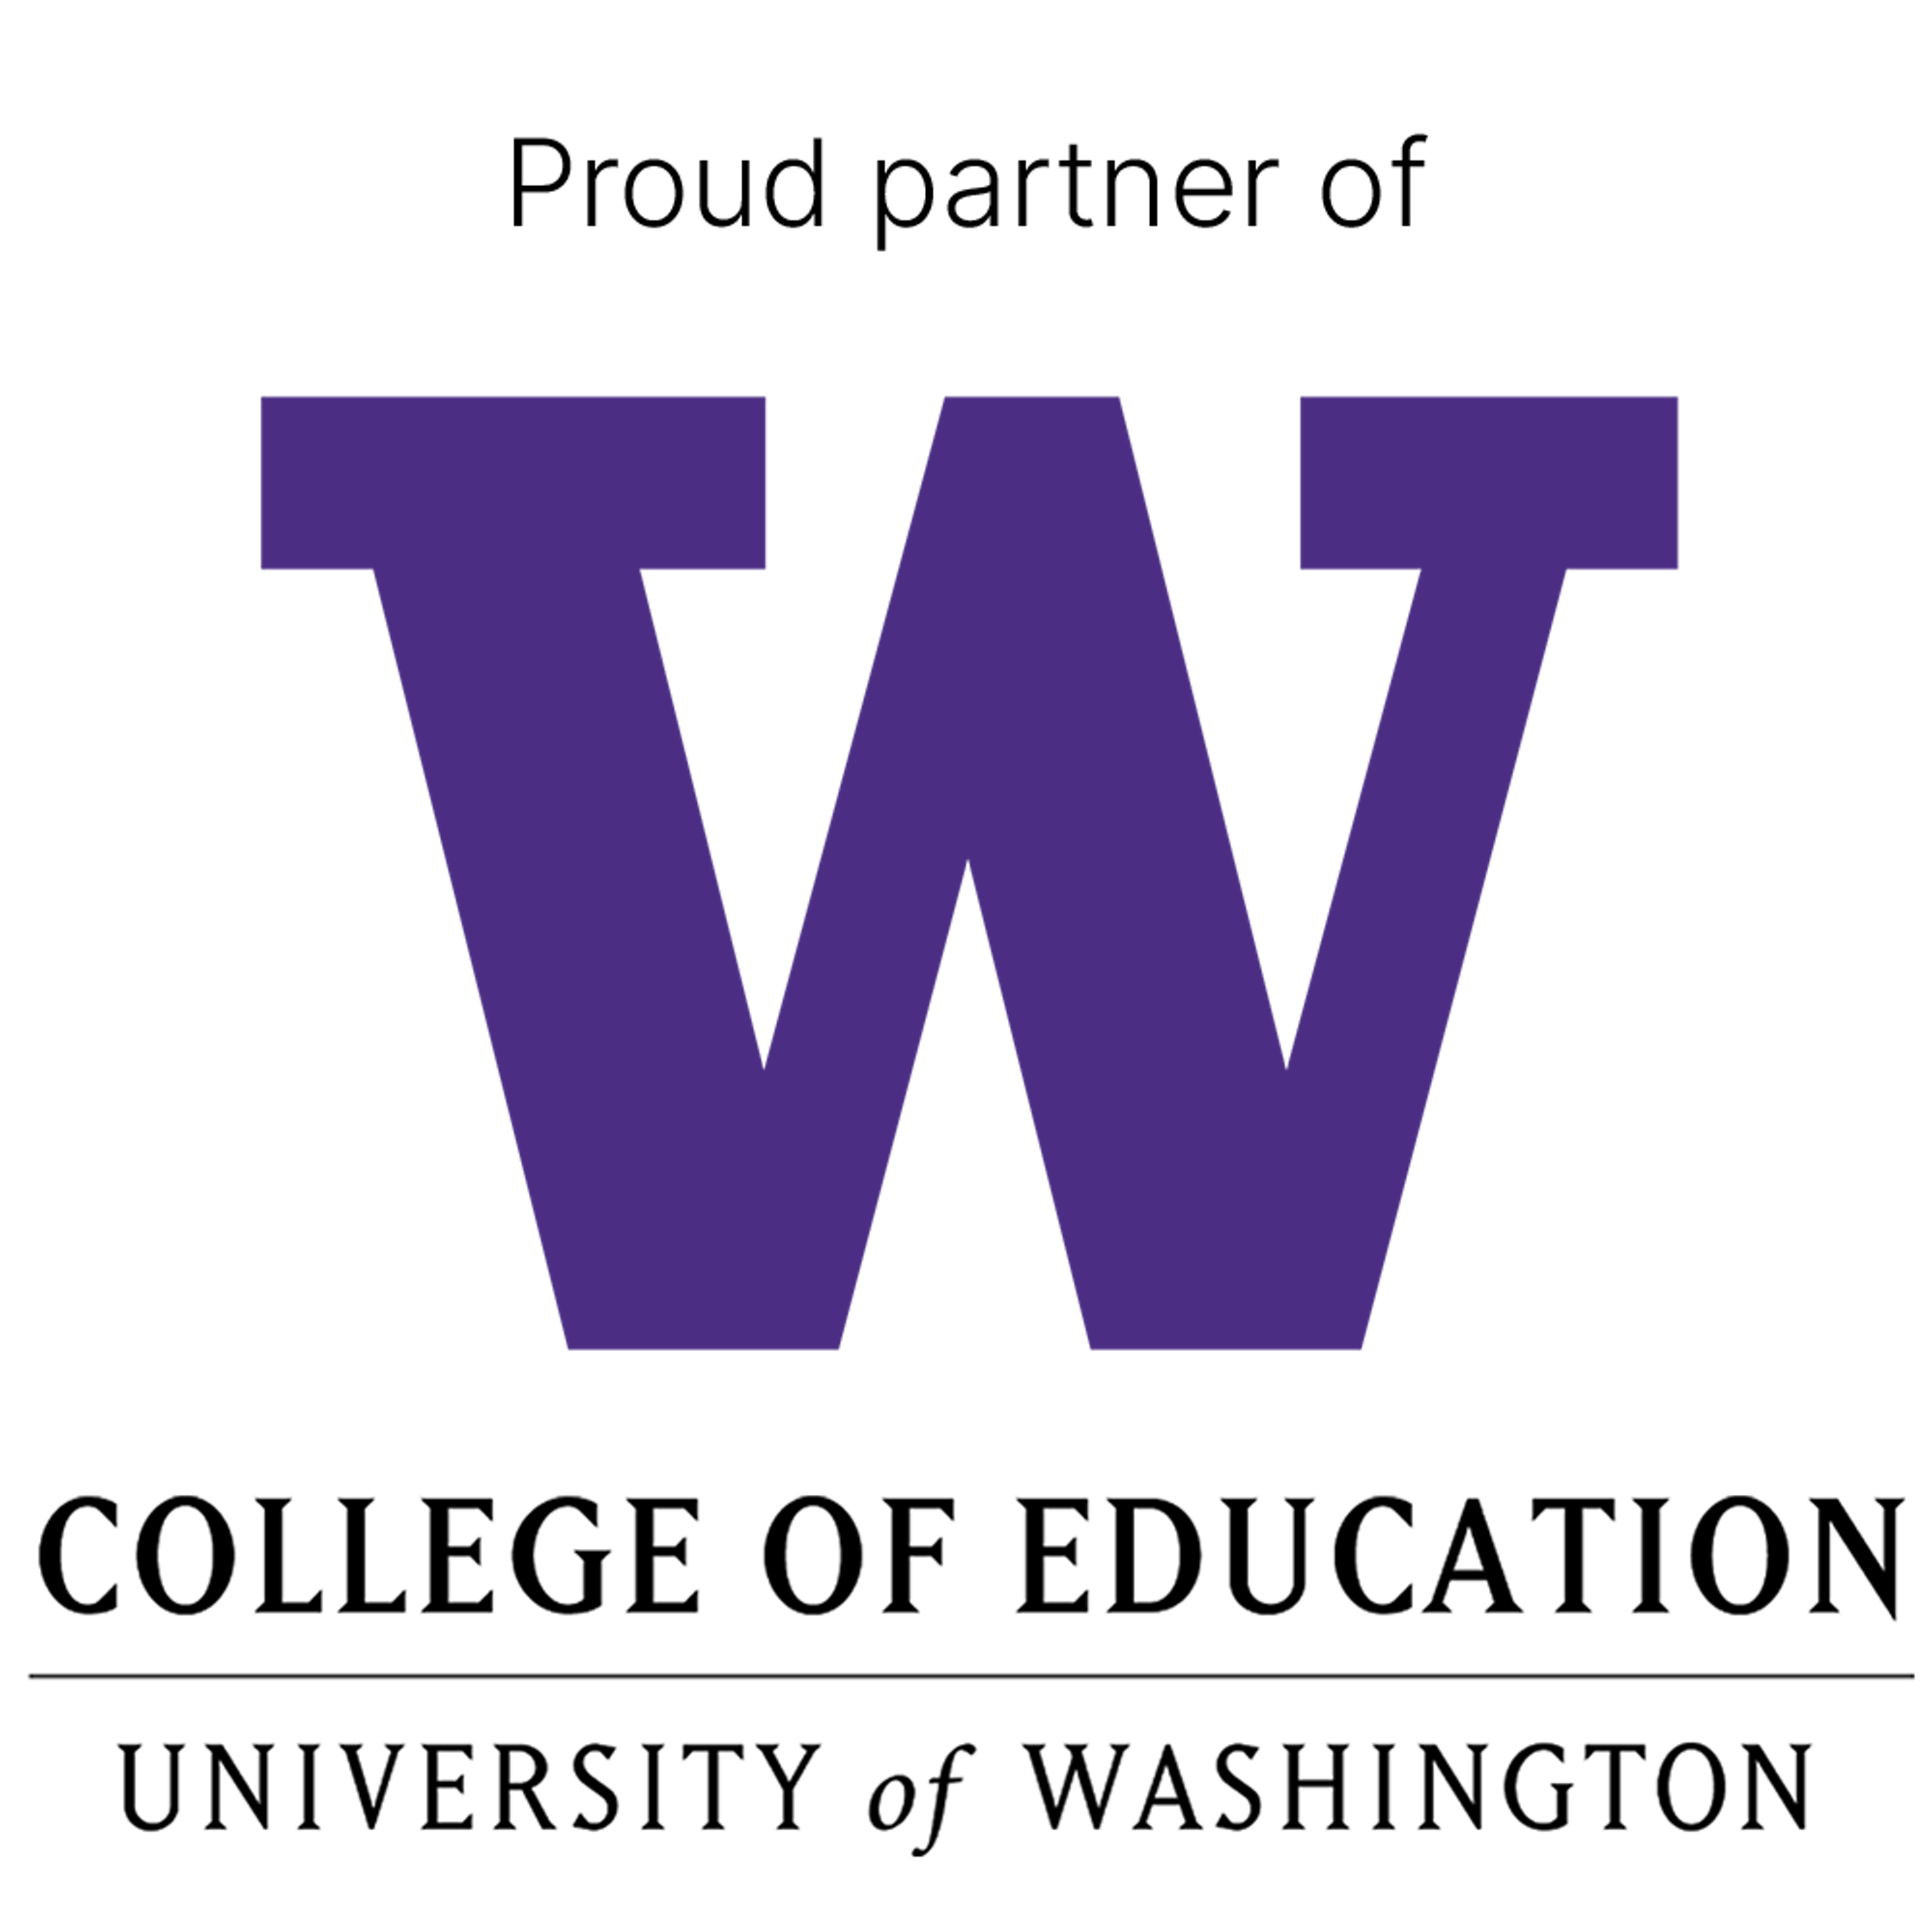 The logo for the University of Washington College of Education